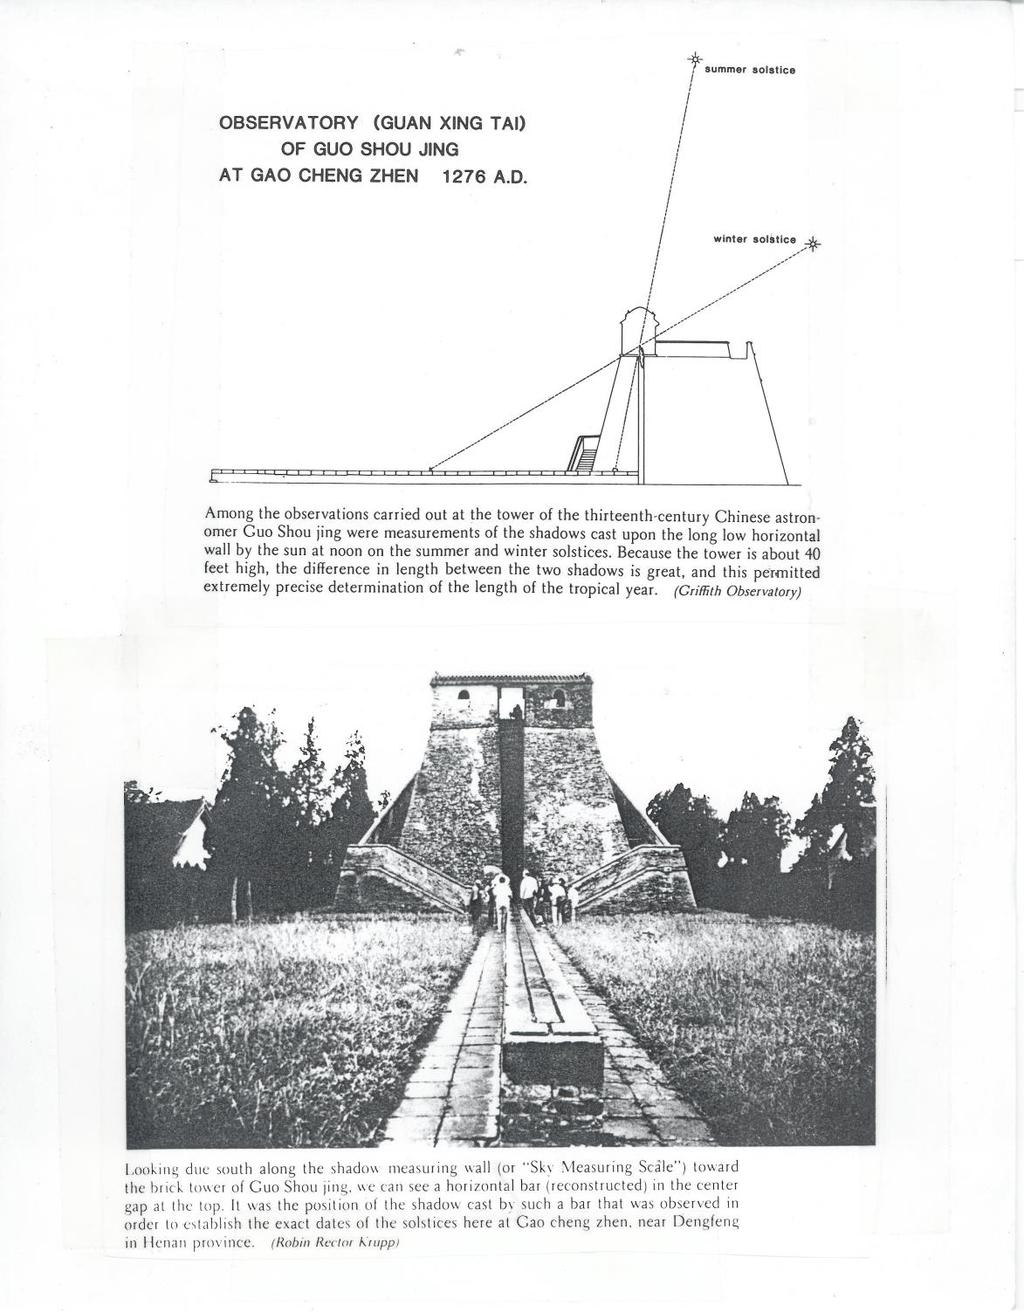 CHINESE SKY MEASURING SCALE: a meridian line LOCATES POSITION OF SUN ALONG THE MERIDIAN AT SOLAR NOON.